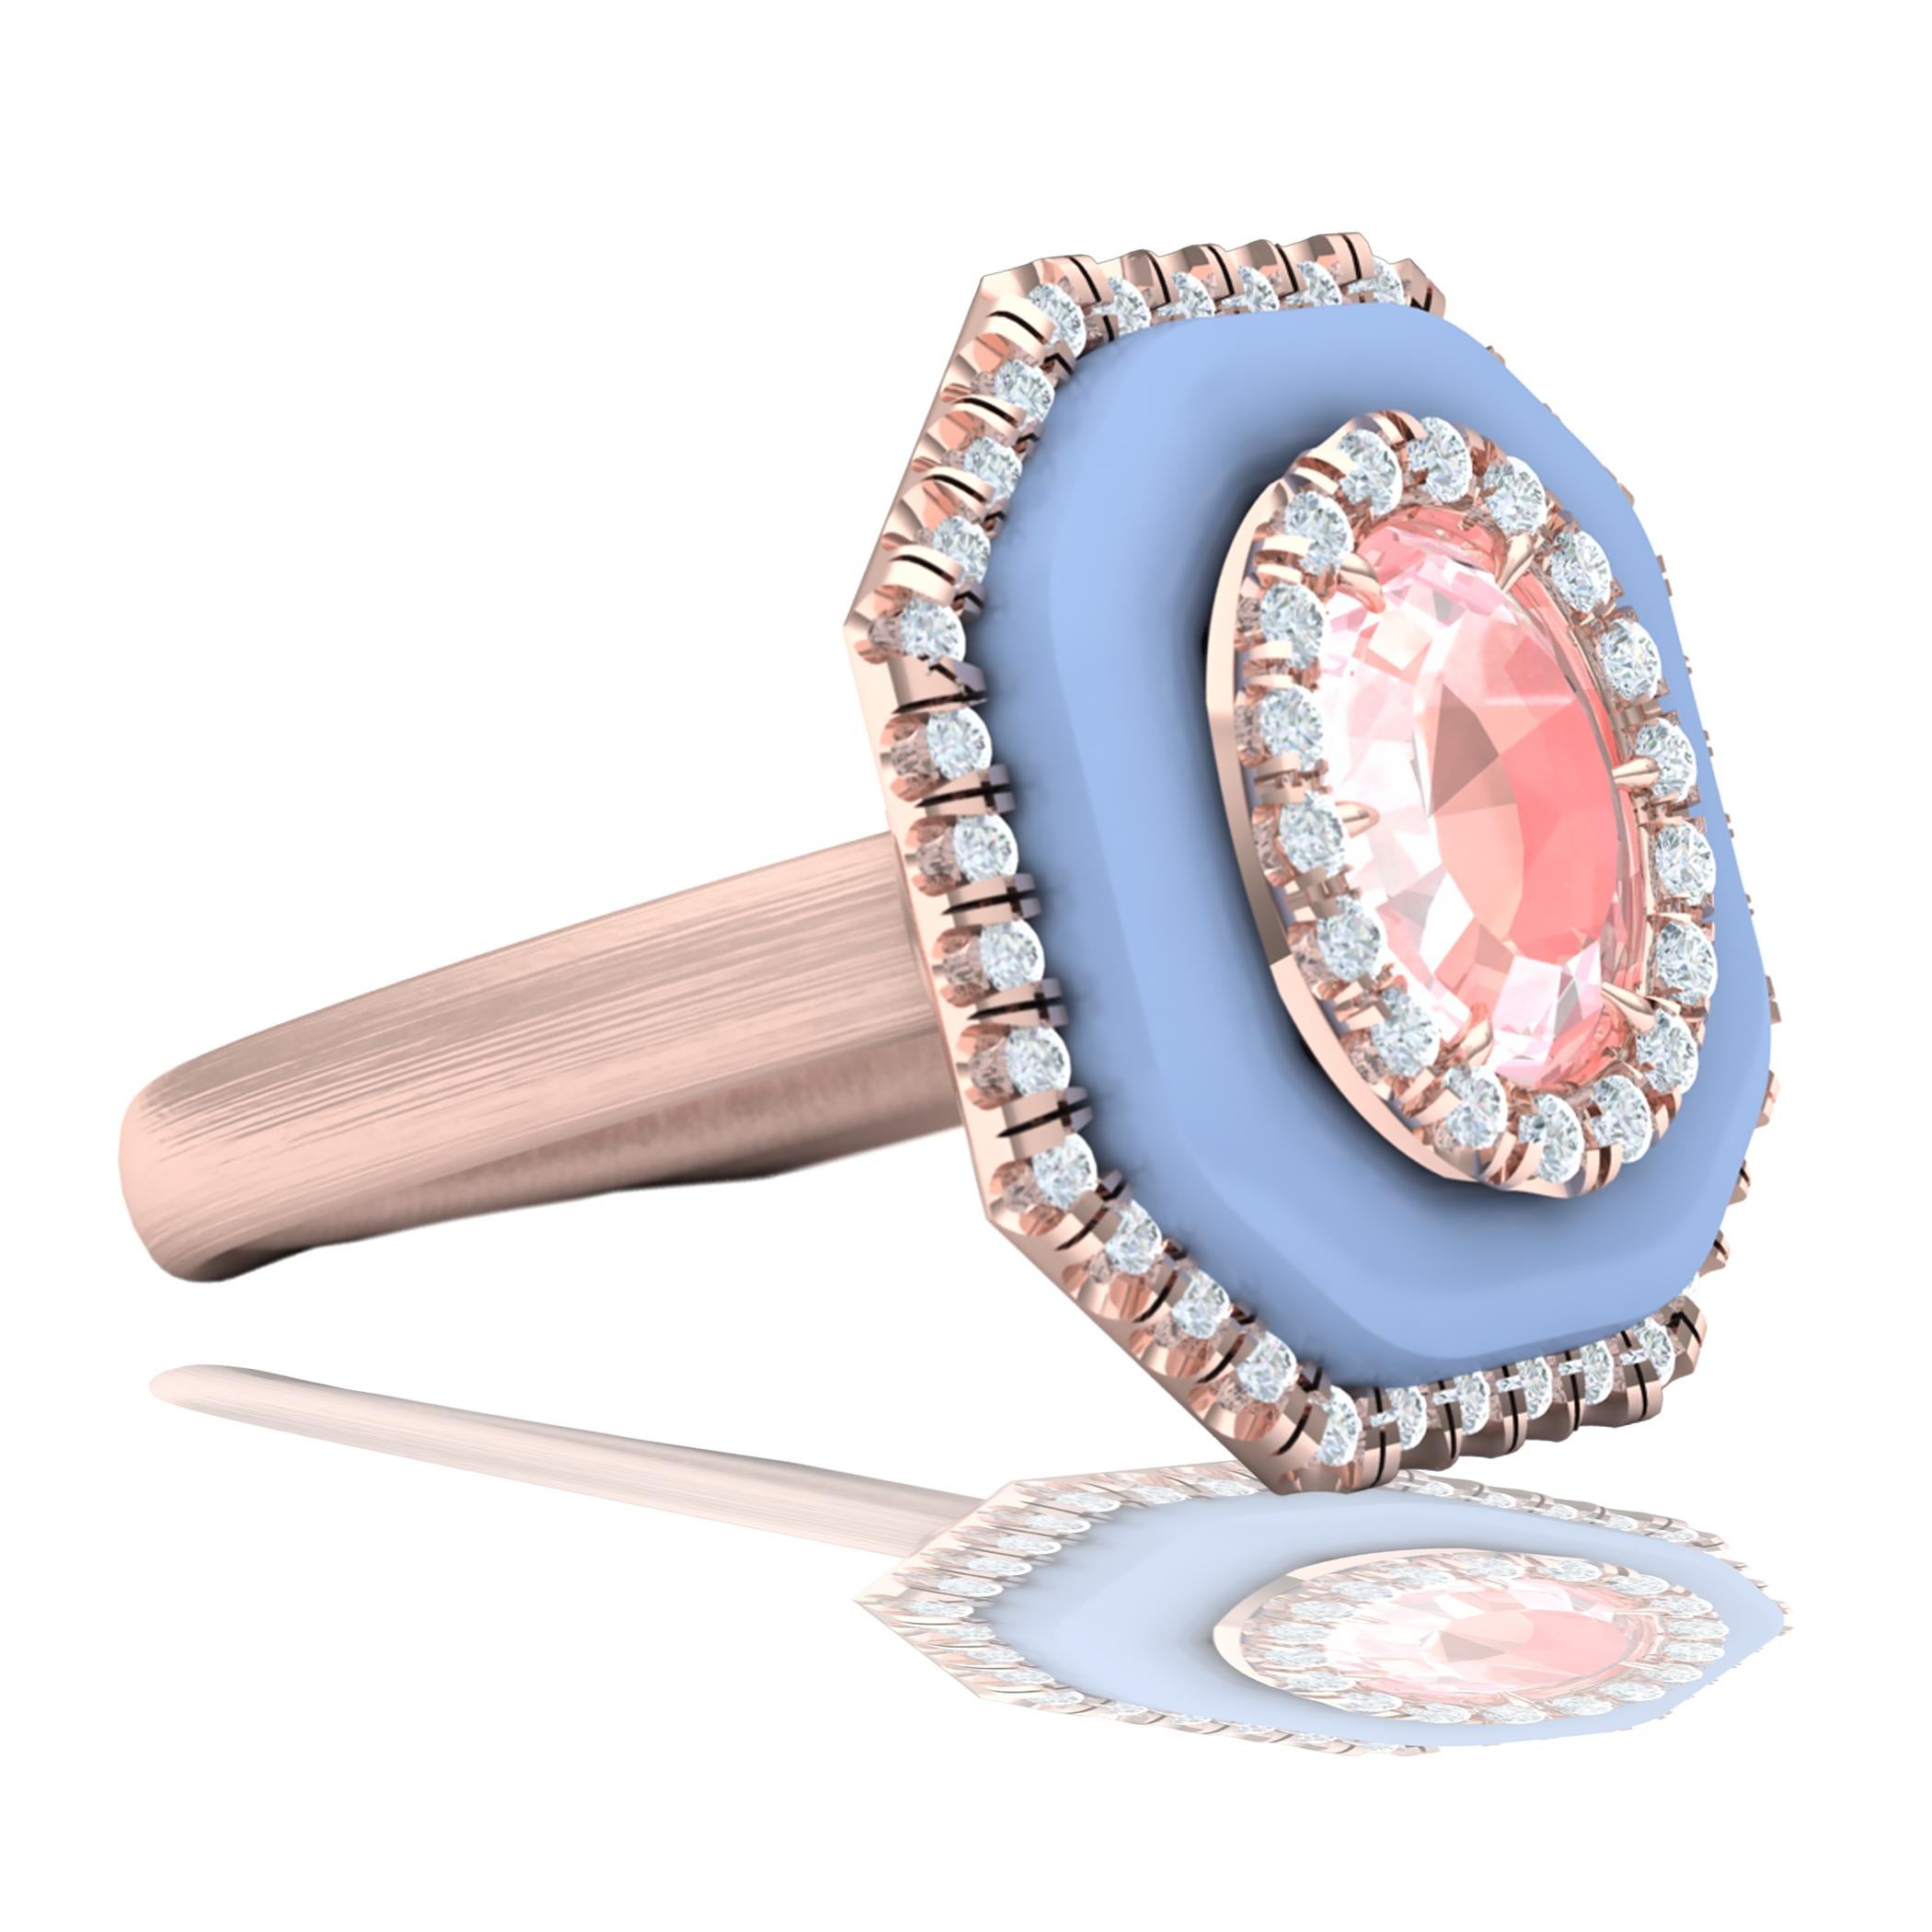 A beautiful display of pastel peach pink and lavender is seen in this custom cocktail ring.  This ring has a .80 carat rare and beautiful Rhodocrosite gemstone, which is extremely rare to find in faceted gemstone quality.  The center stone has a 